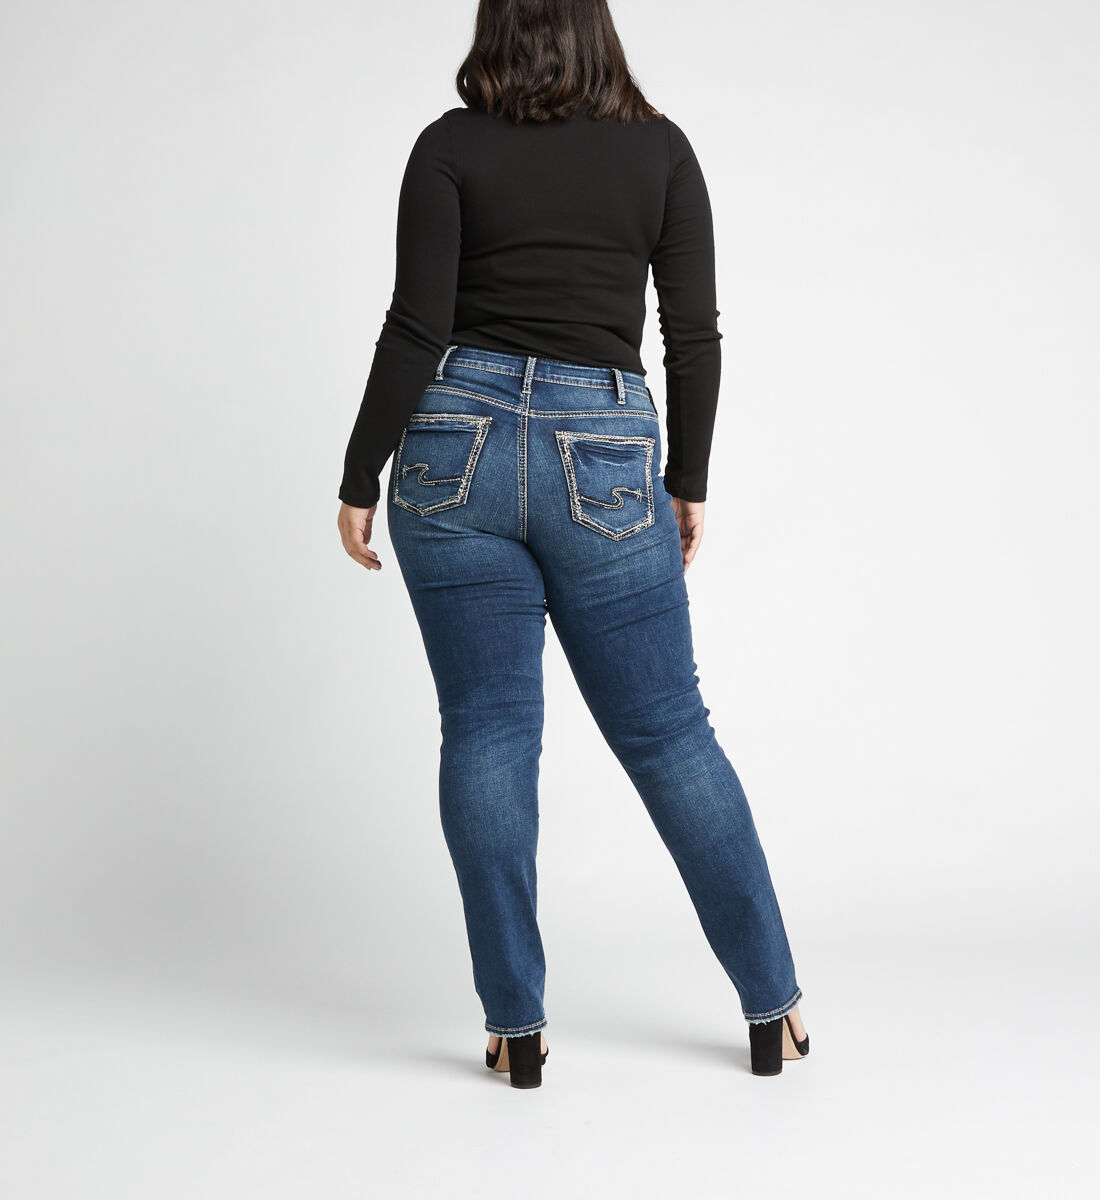 plus size silver jeans canada